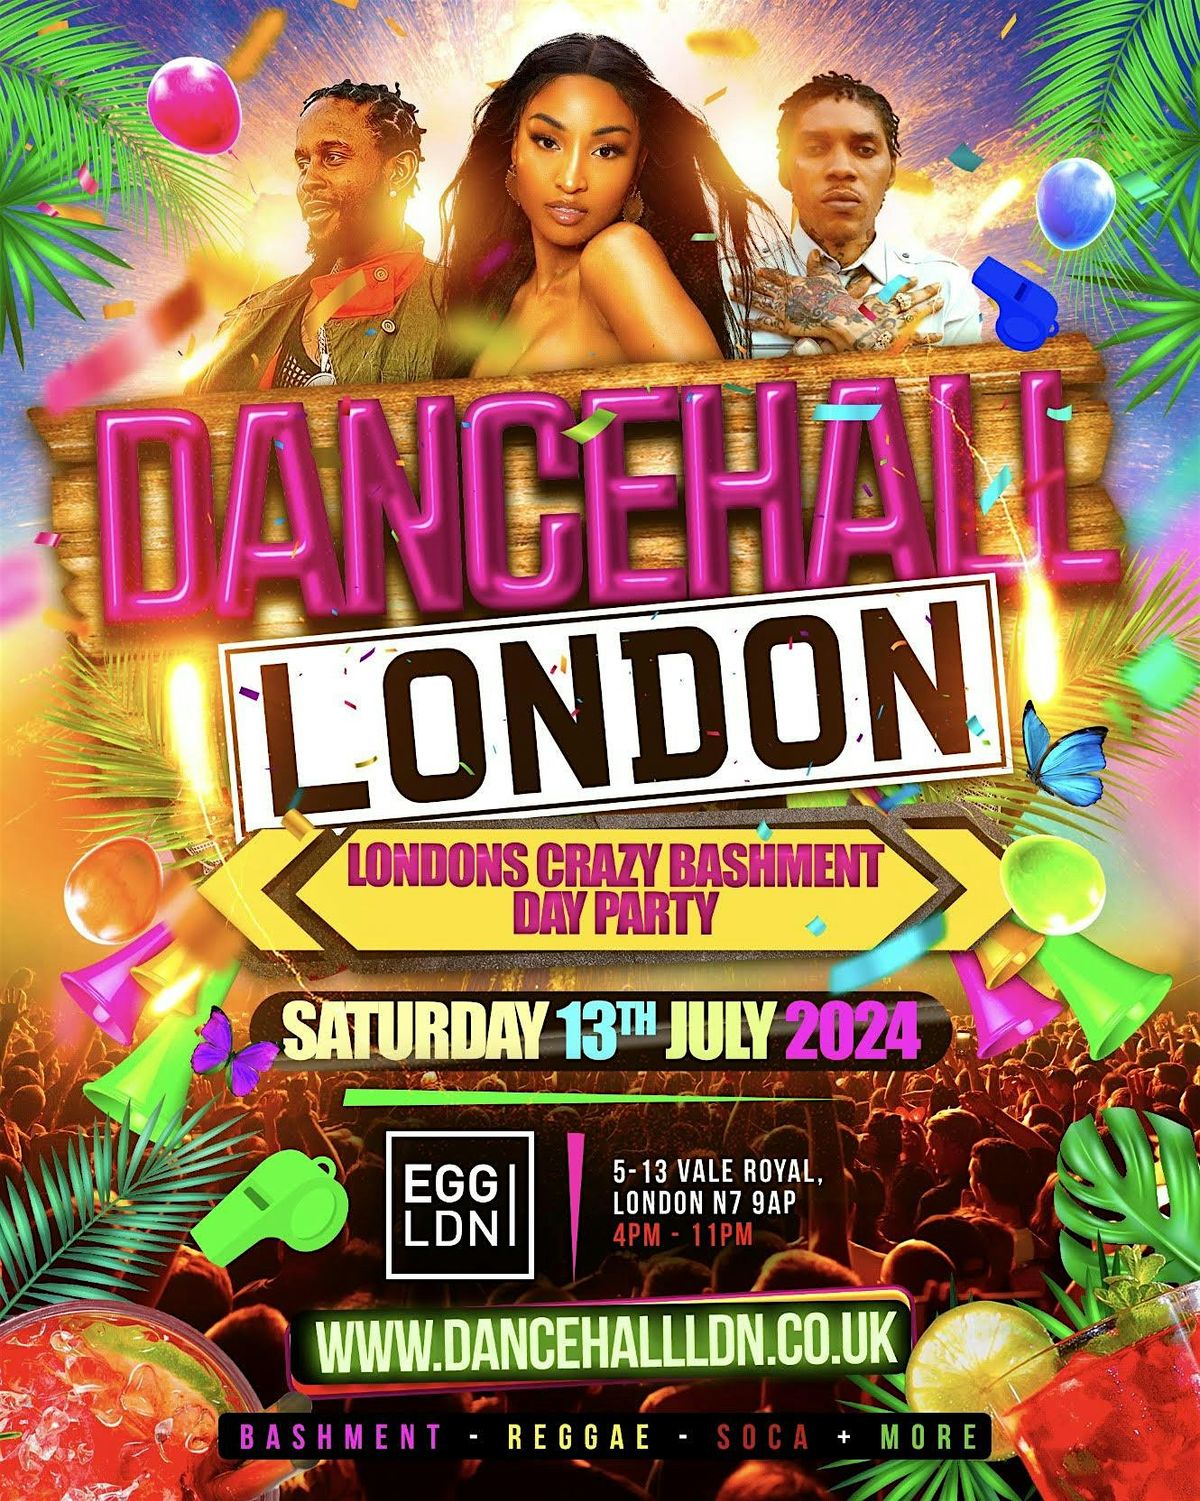 DANCEHALL LONDON - BASHMENT DAY PARTY